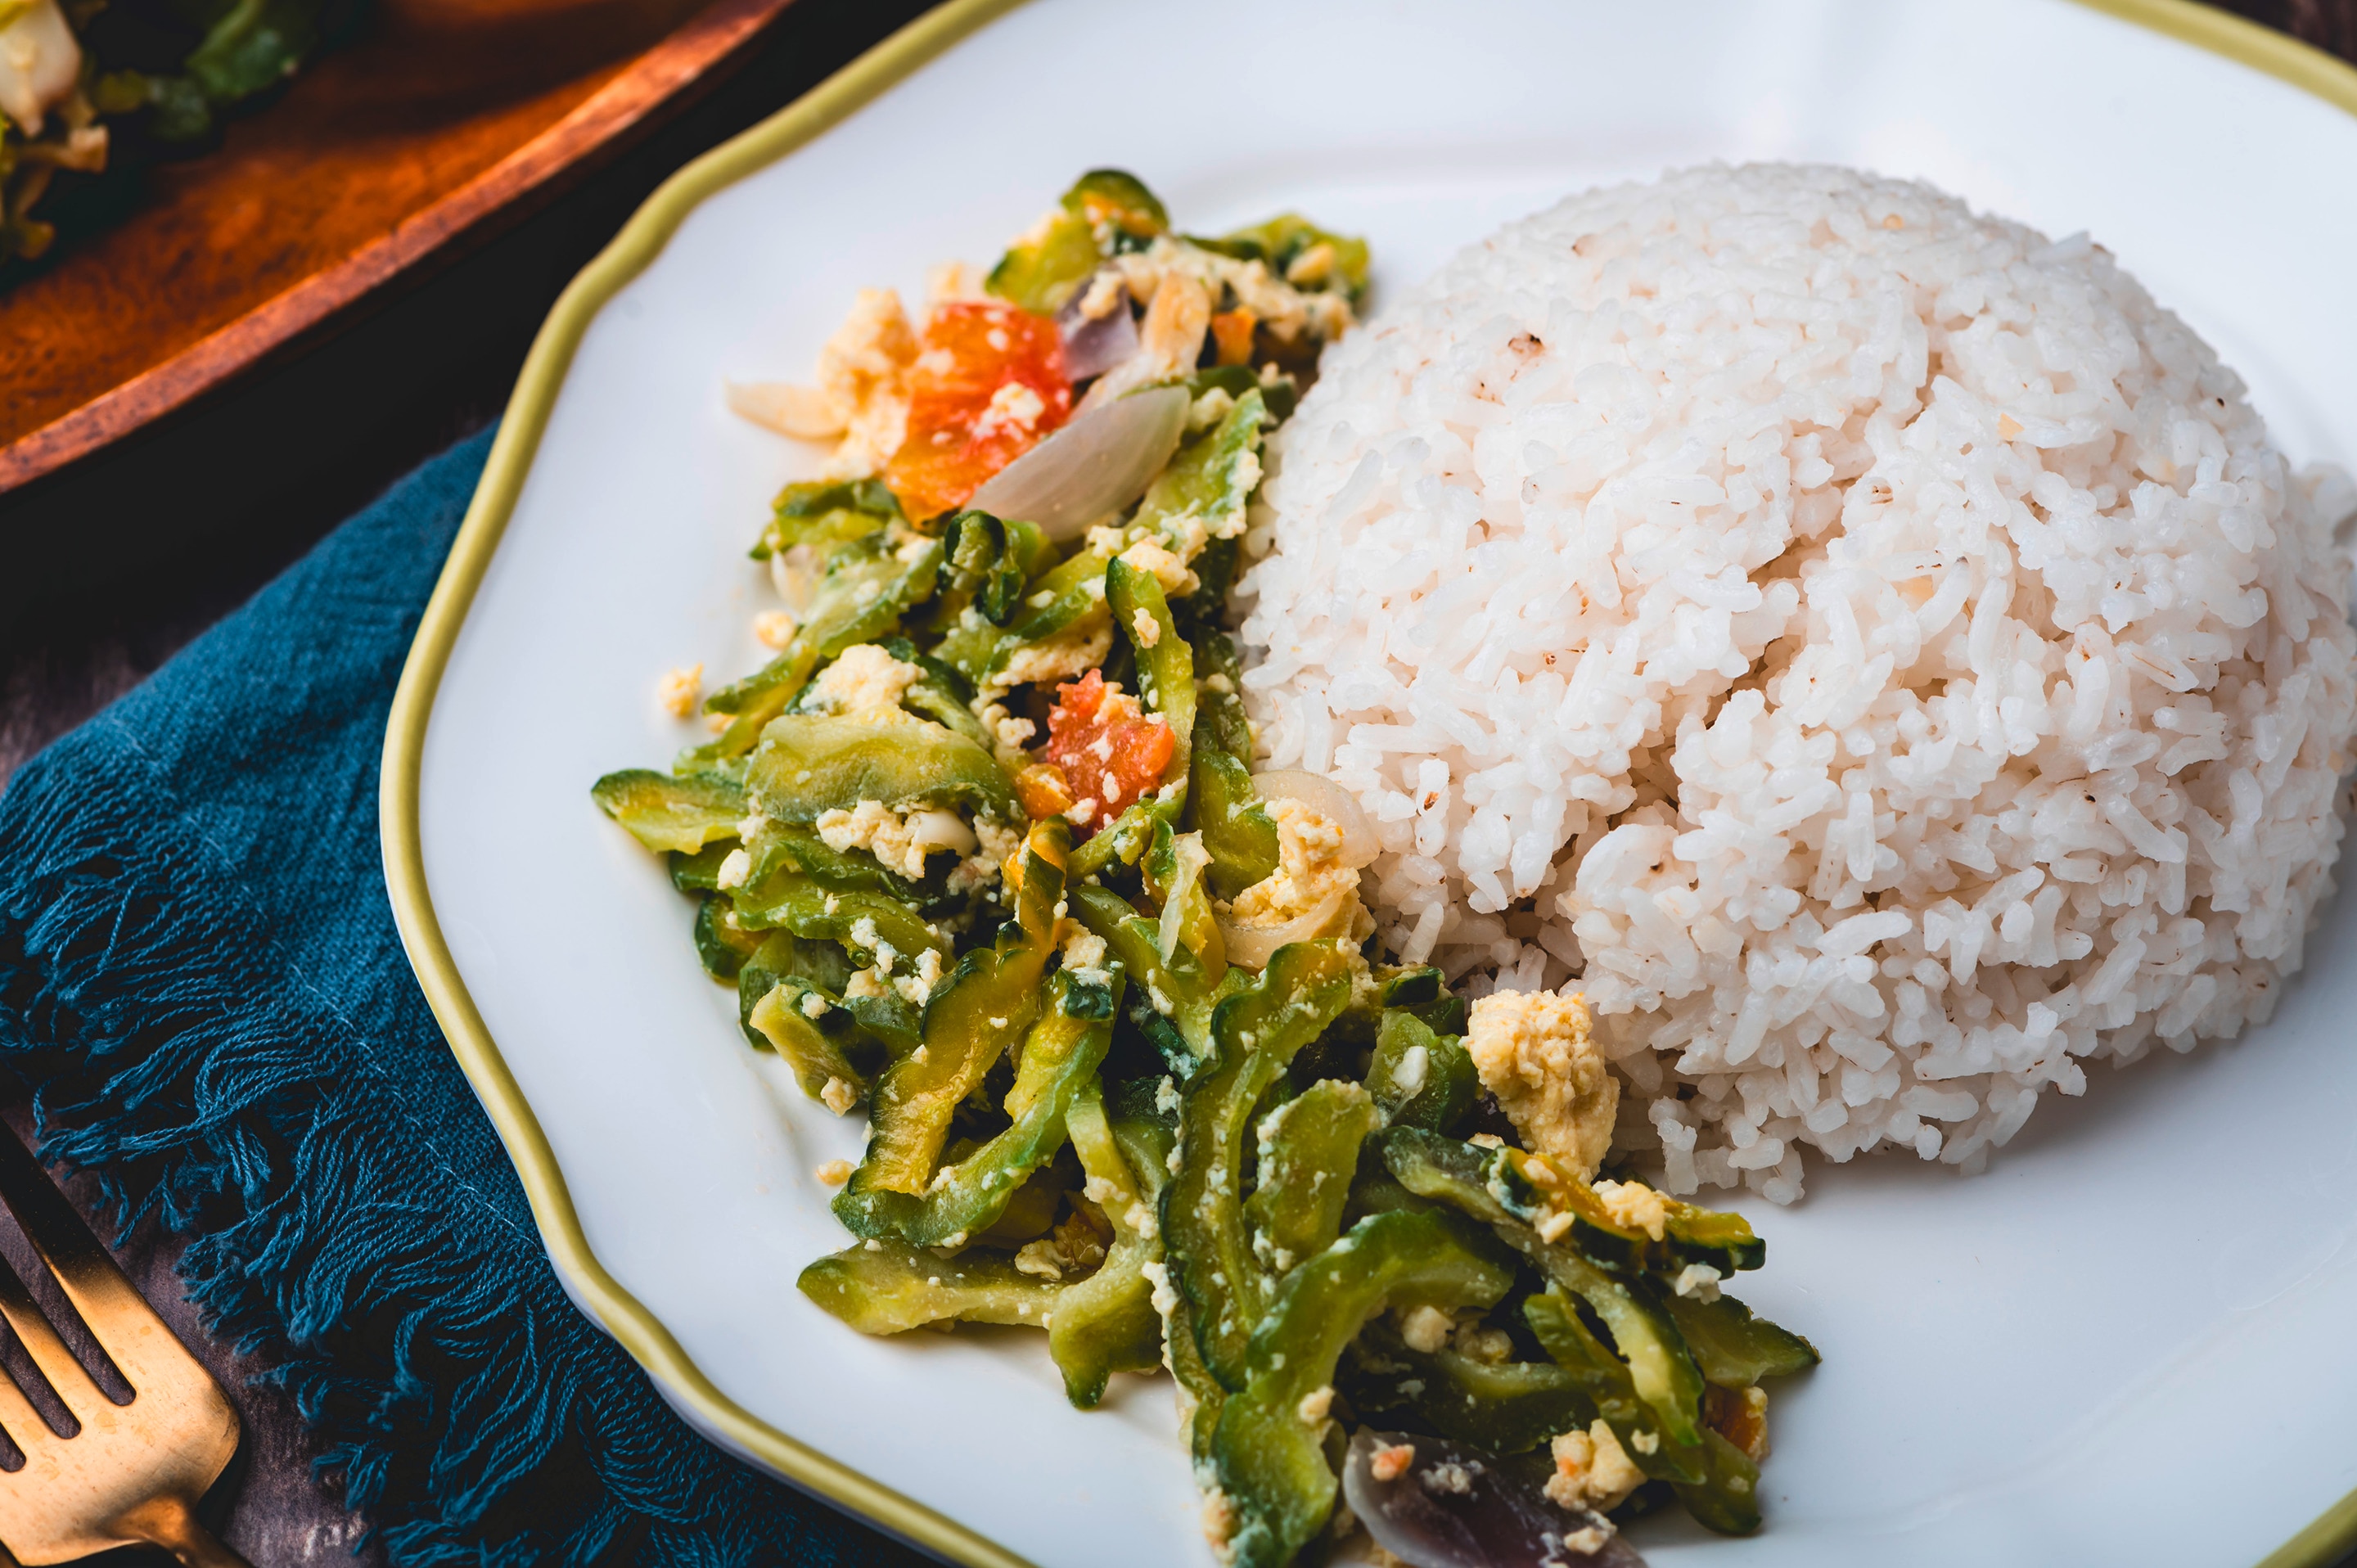 A plate with ginisang ampalaya with egg and a cup of rice